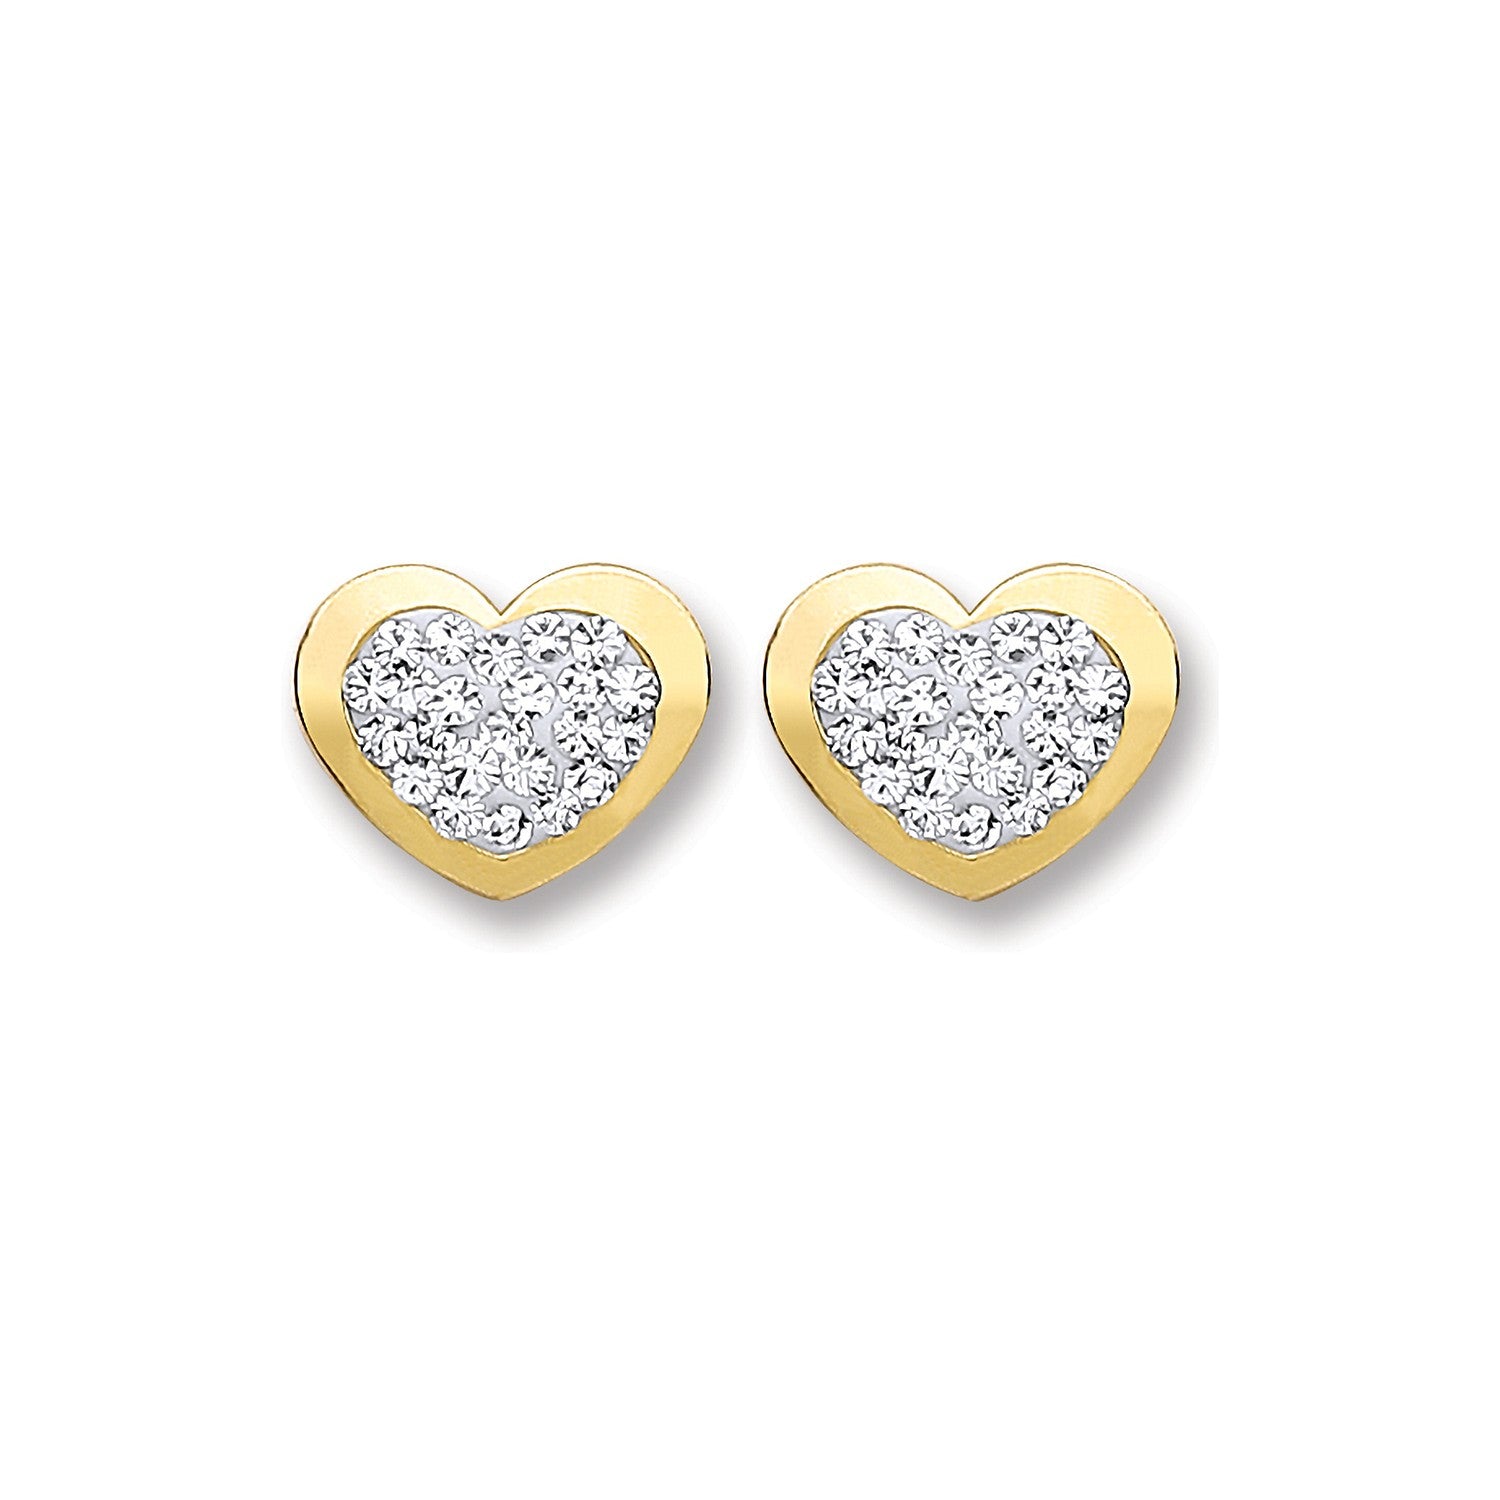 9ct Gold Heart Shape with Crystals Studs